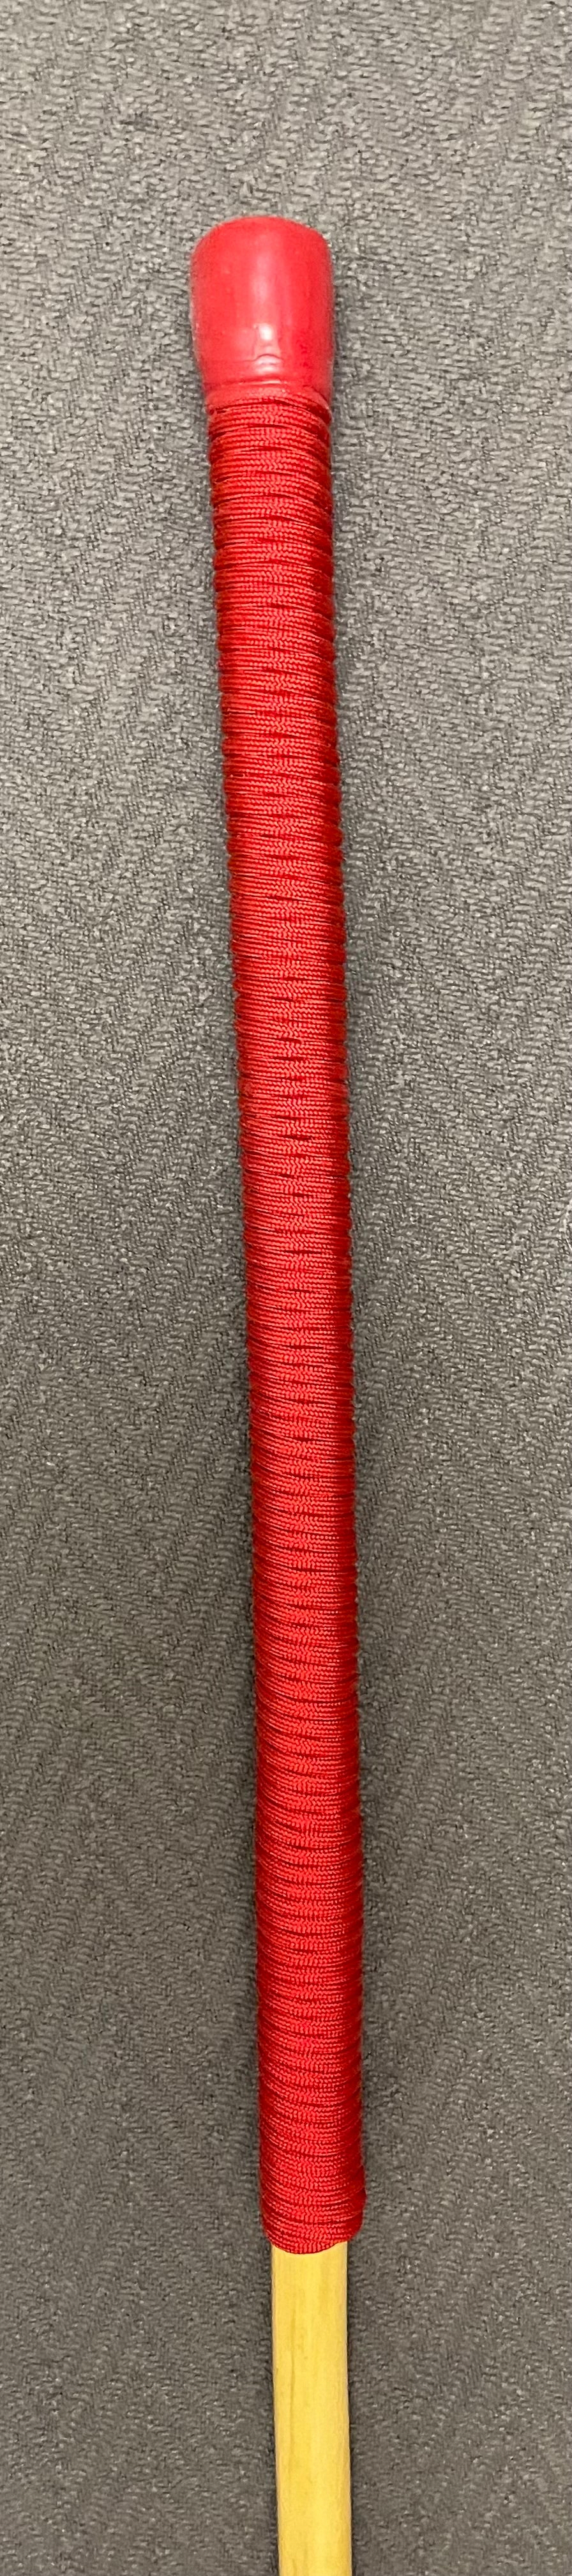 Singapore Prison Cane -  Standard and Extreme Editions - Judicial Rattan Cane (Malacca Rattan) - 1.2m L & 12.5 - 14 or 15-16 mm D - 15” Paracord Handles